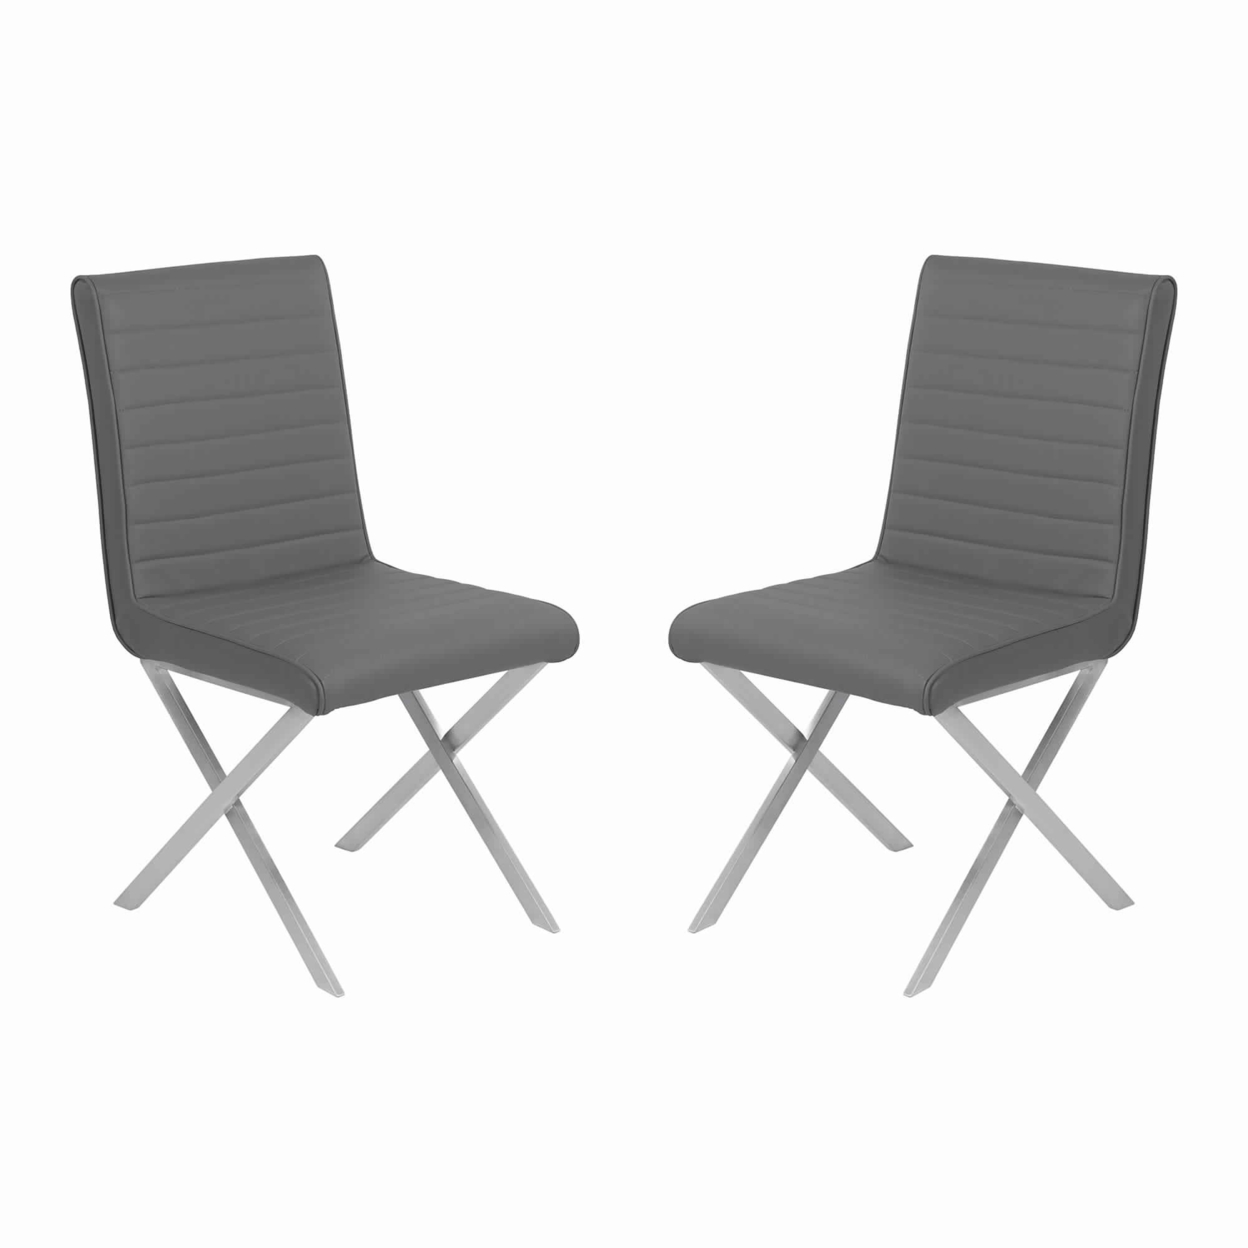 Leatherette Dining Chair With X Shaped Metal Legs, Set Of 2,Gray And Silver- Saltoro Sherpi